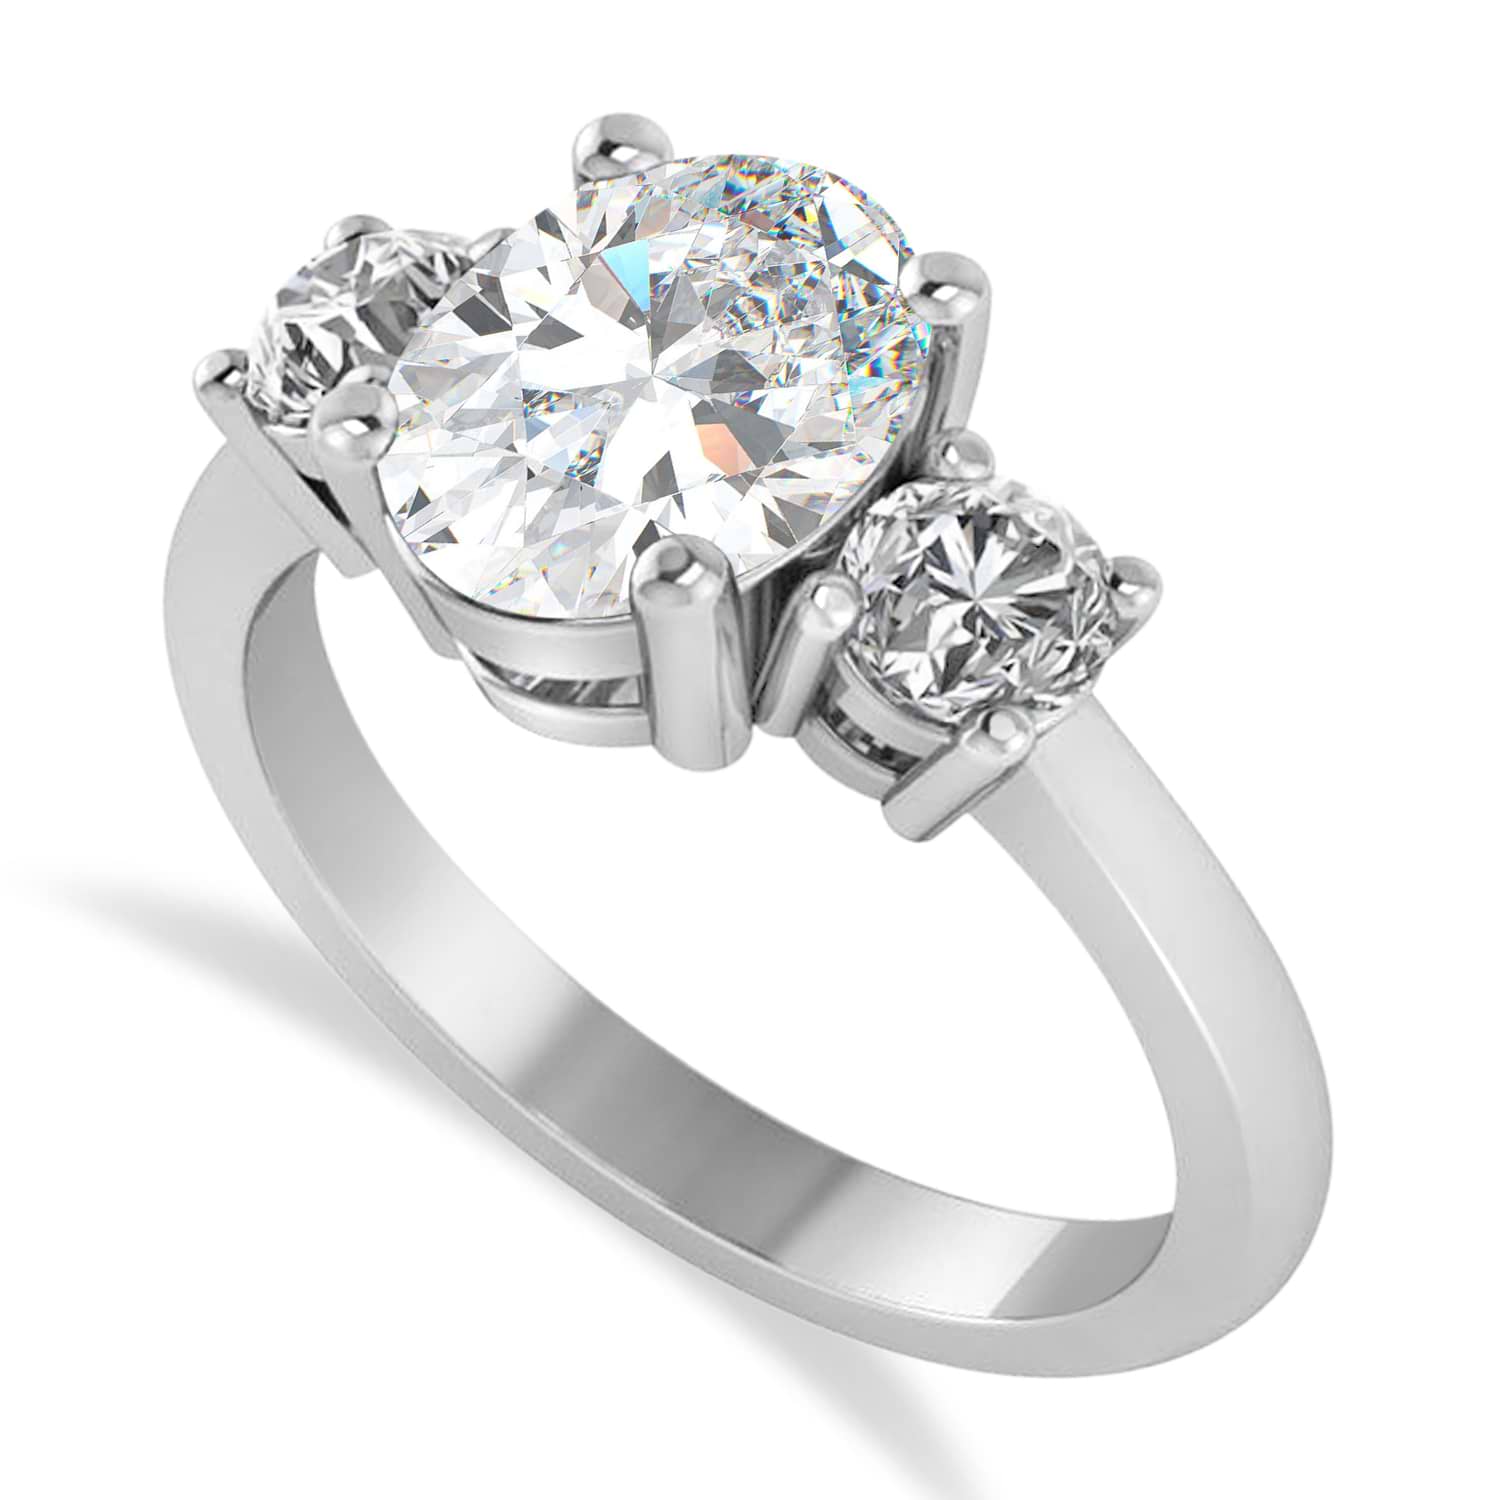 3 Stone Diamond Rings - Acceptance, Understanding and Appreciation